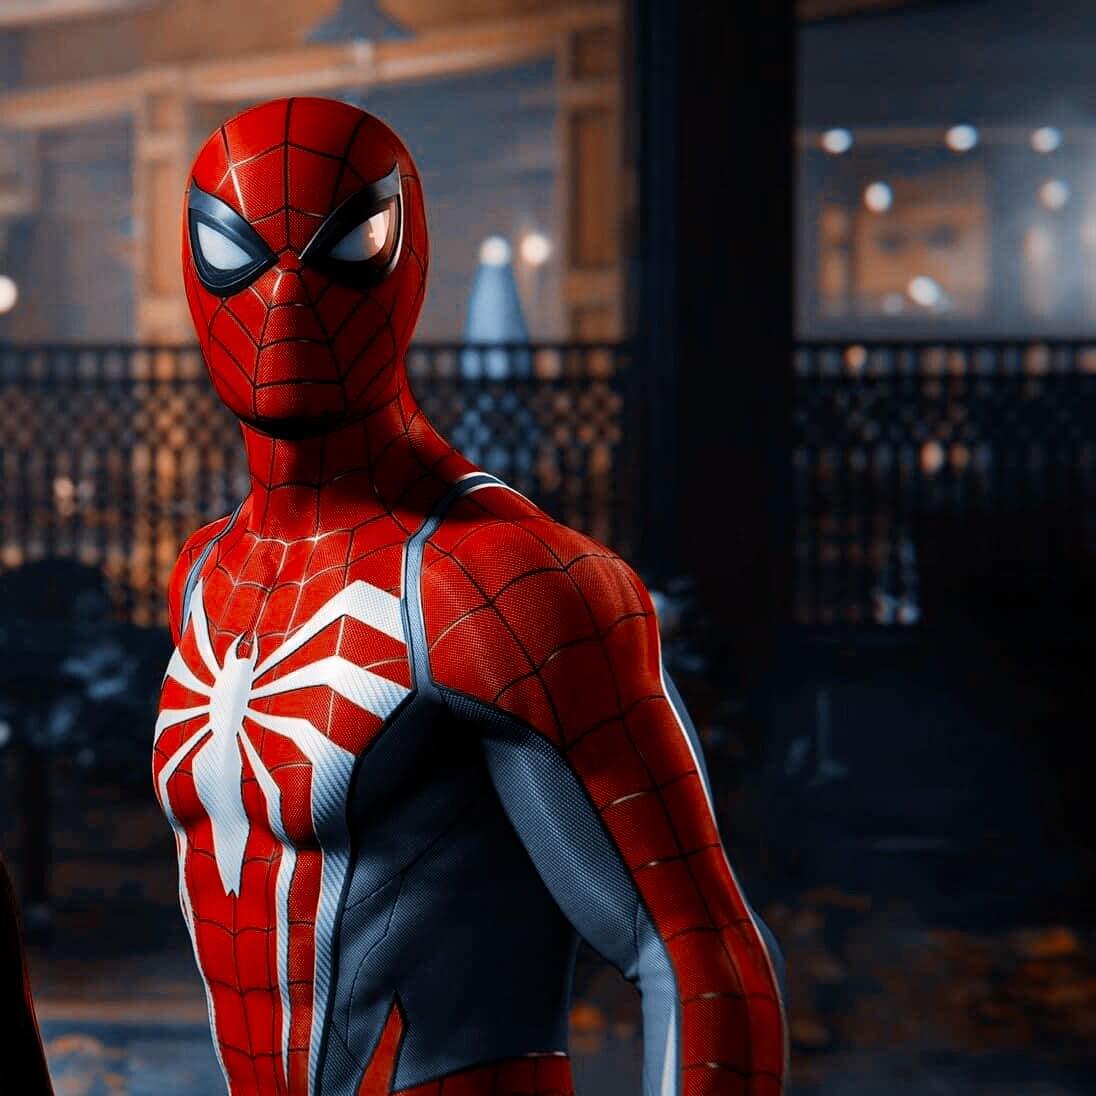 Spiderman Matching Pfp 2 -The Best Matching Pfps To Express Your Style And Personality